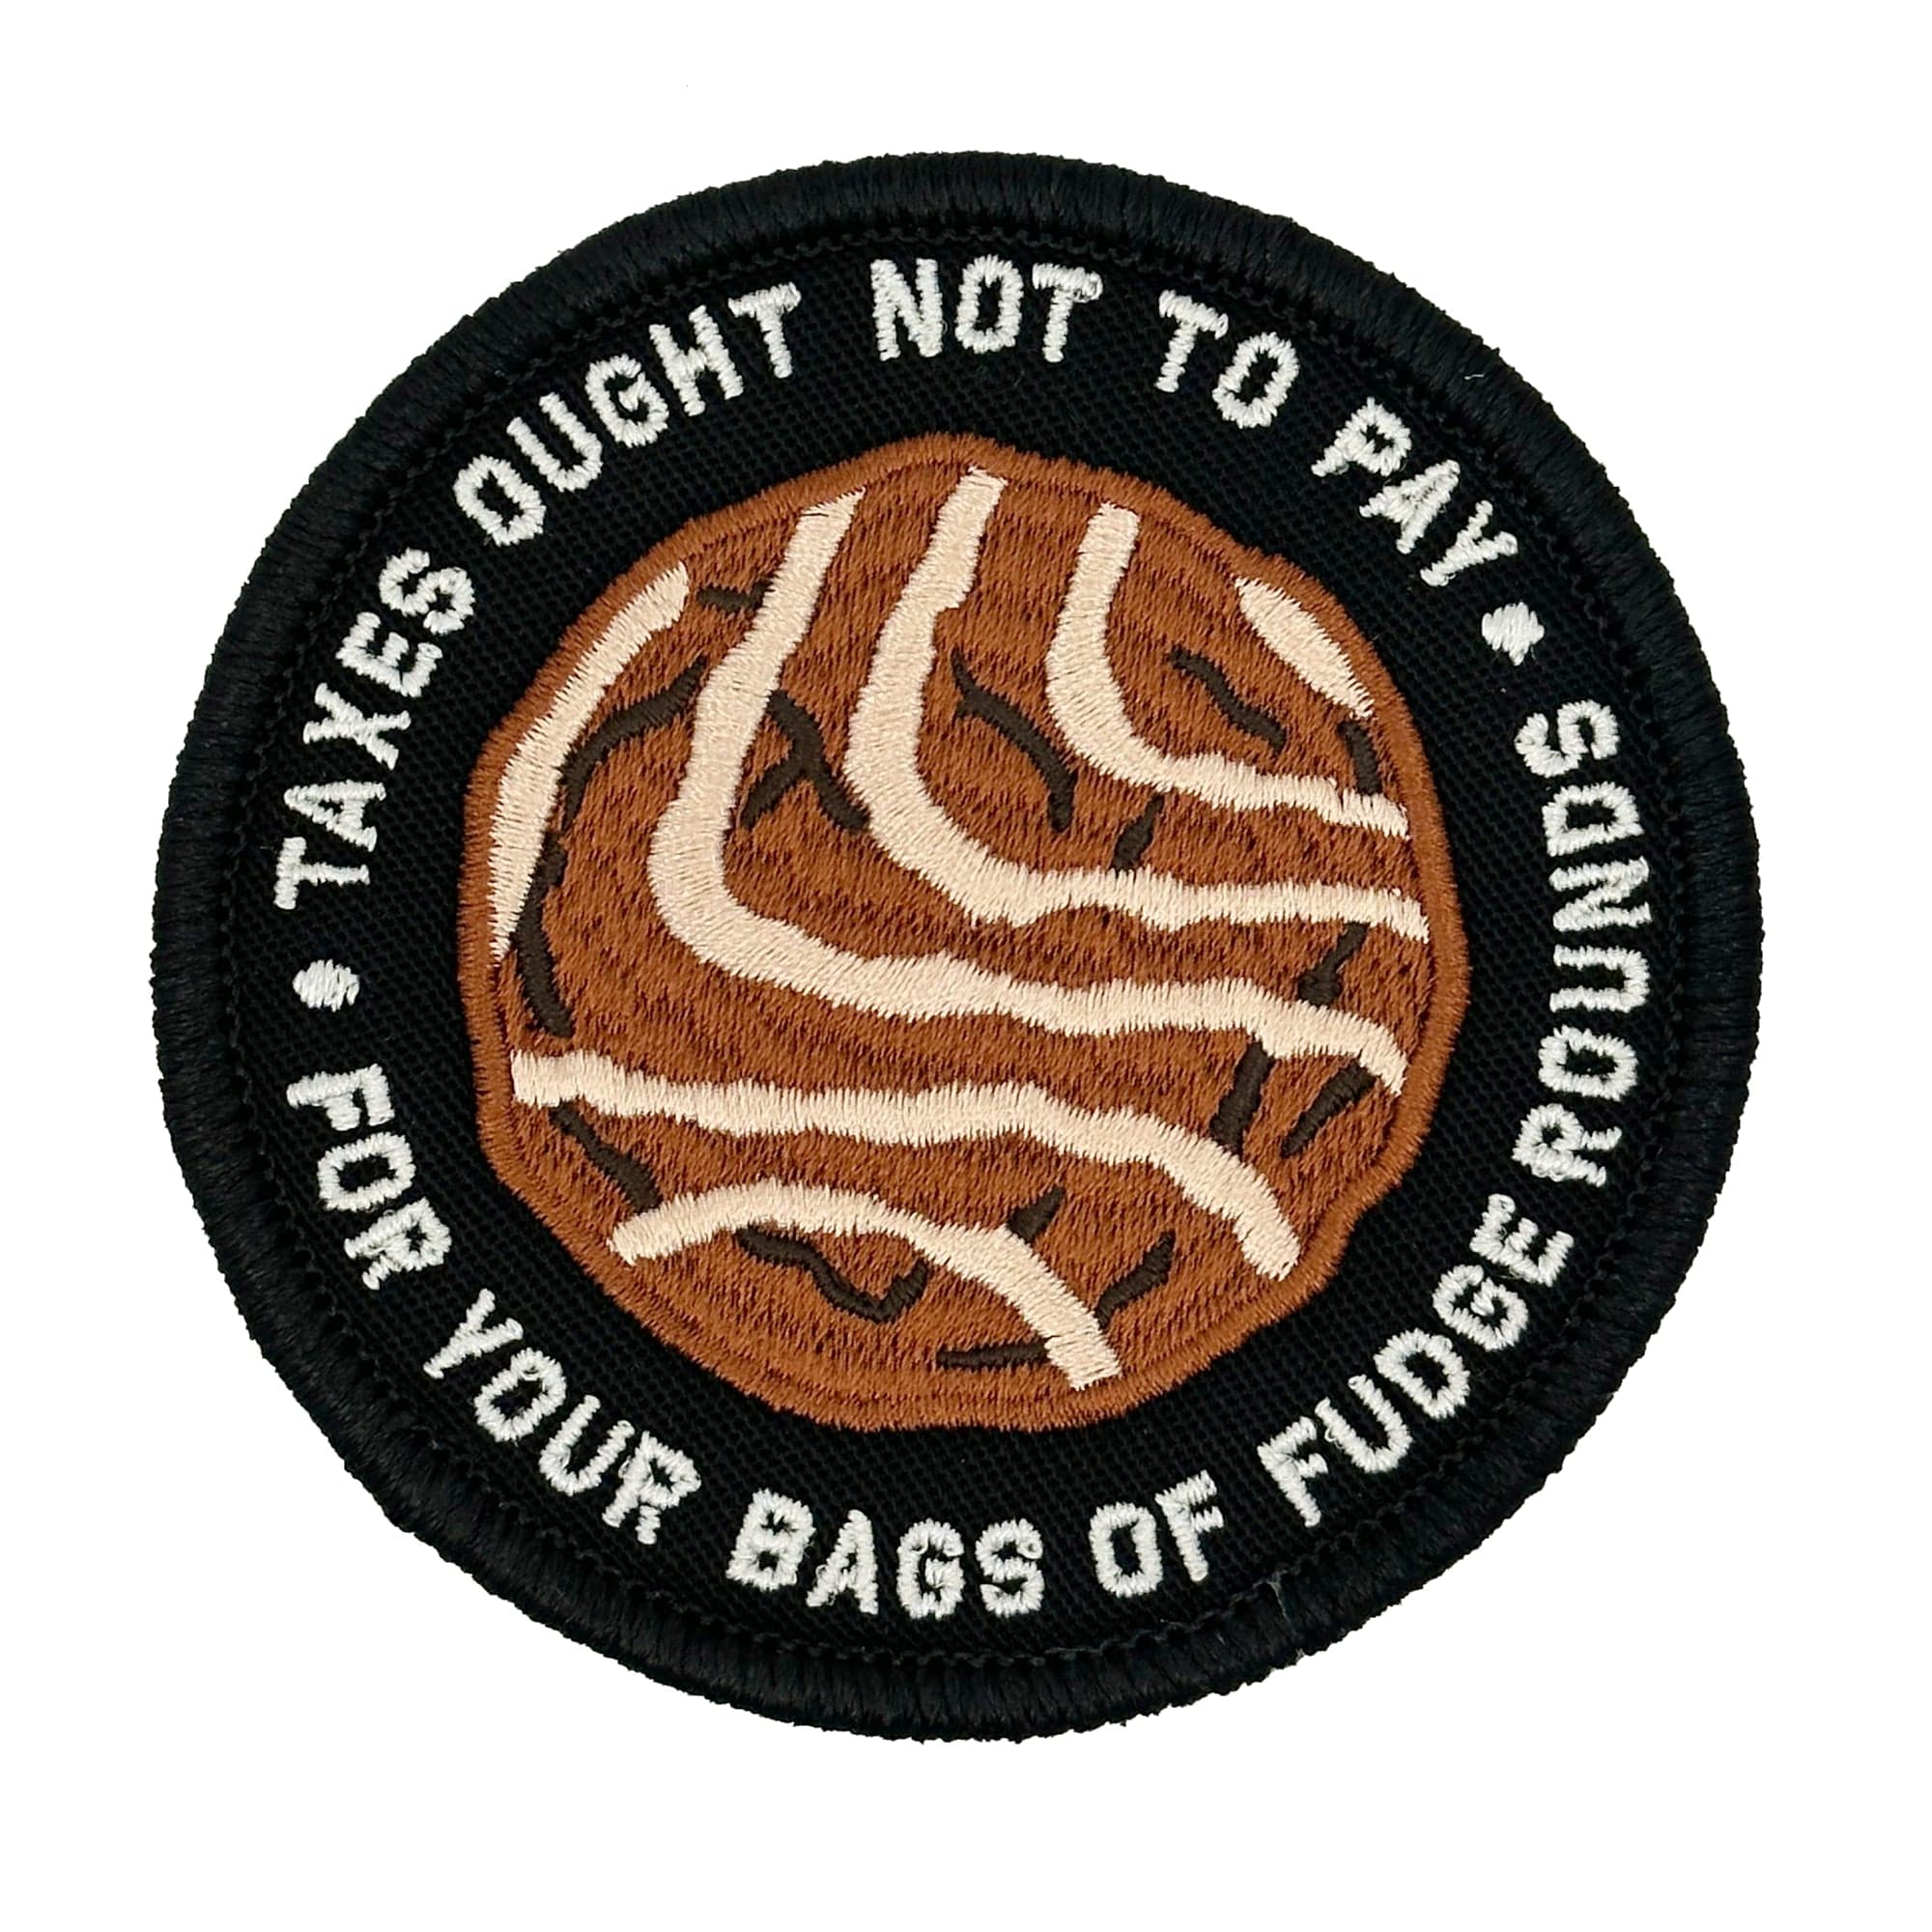 Tactical Gear Junkie Patches Fudge Rounds - 3.5 inch Round Patch